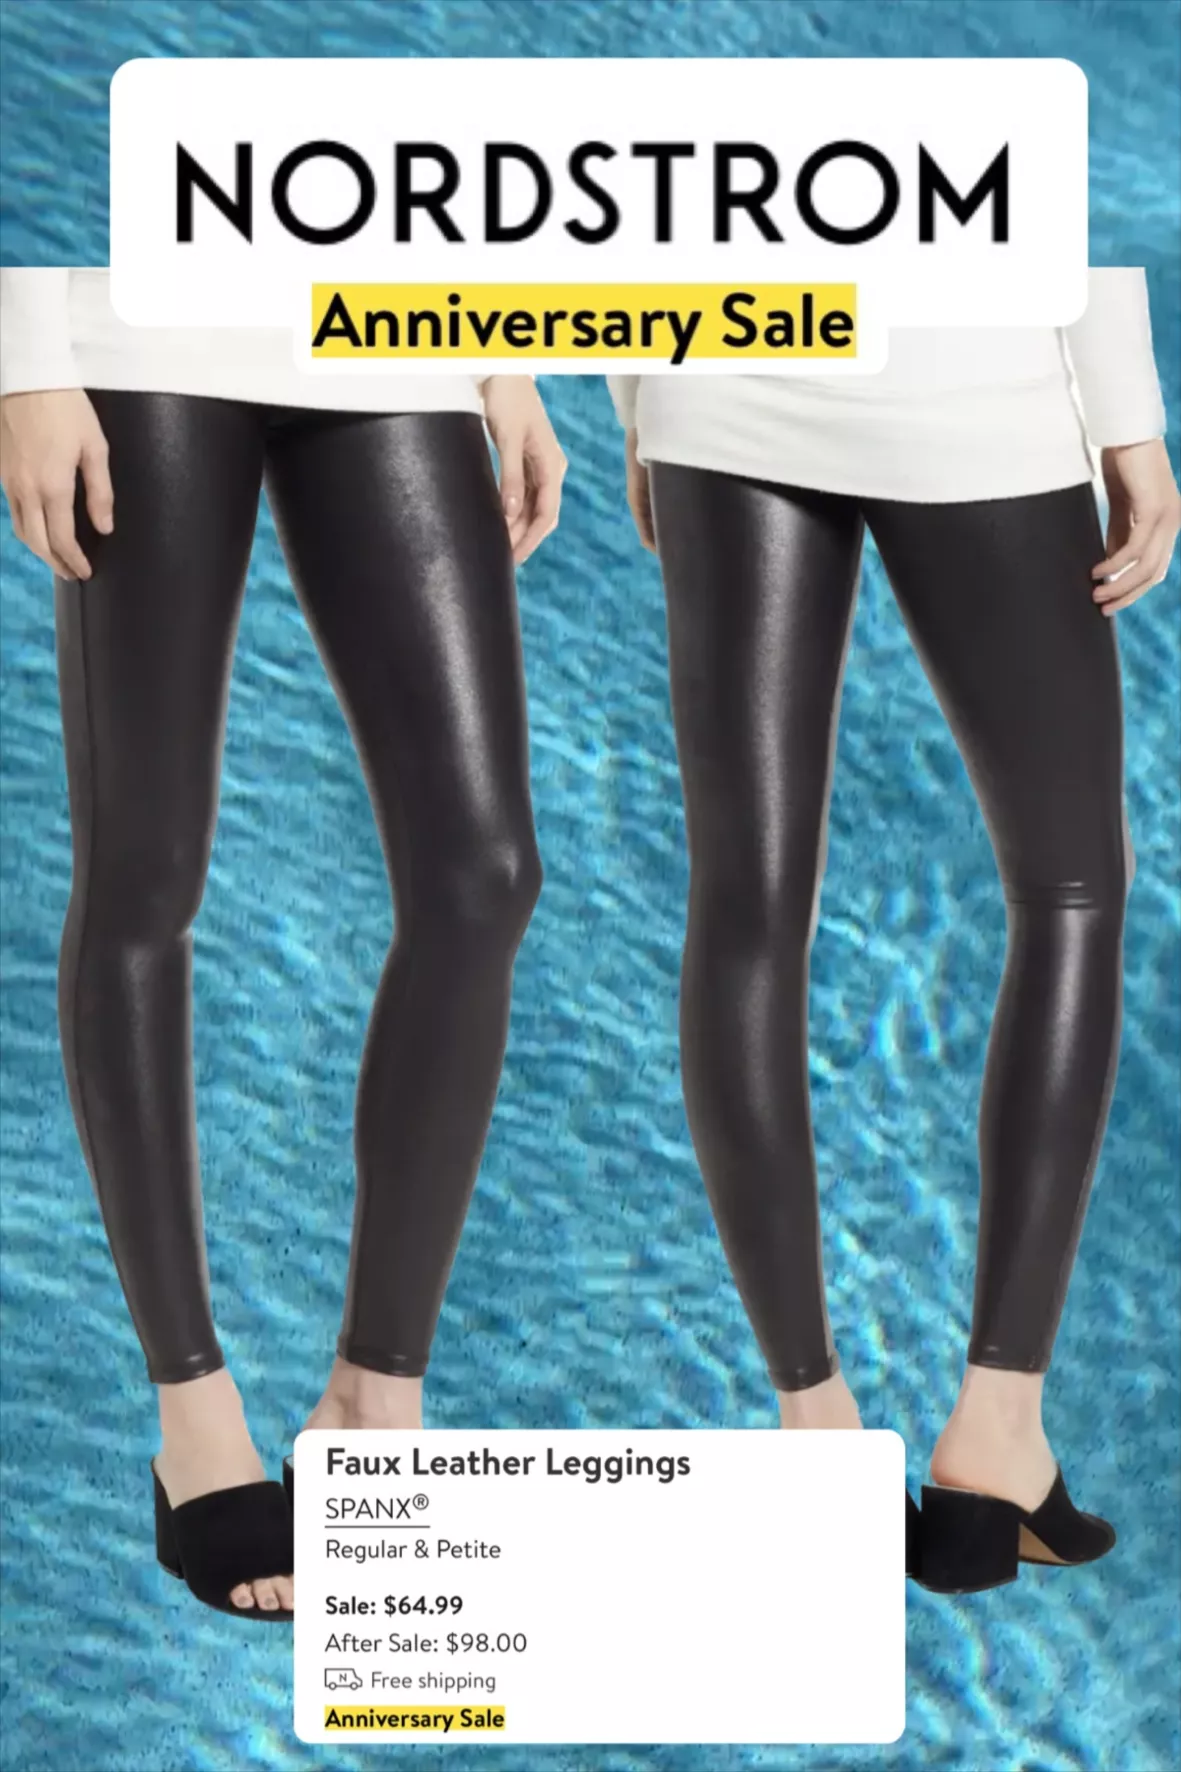 Buy Spanx faux leather leggings on sale at the Nordstrom Anniversary sale